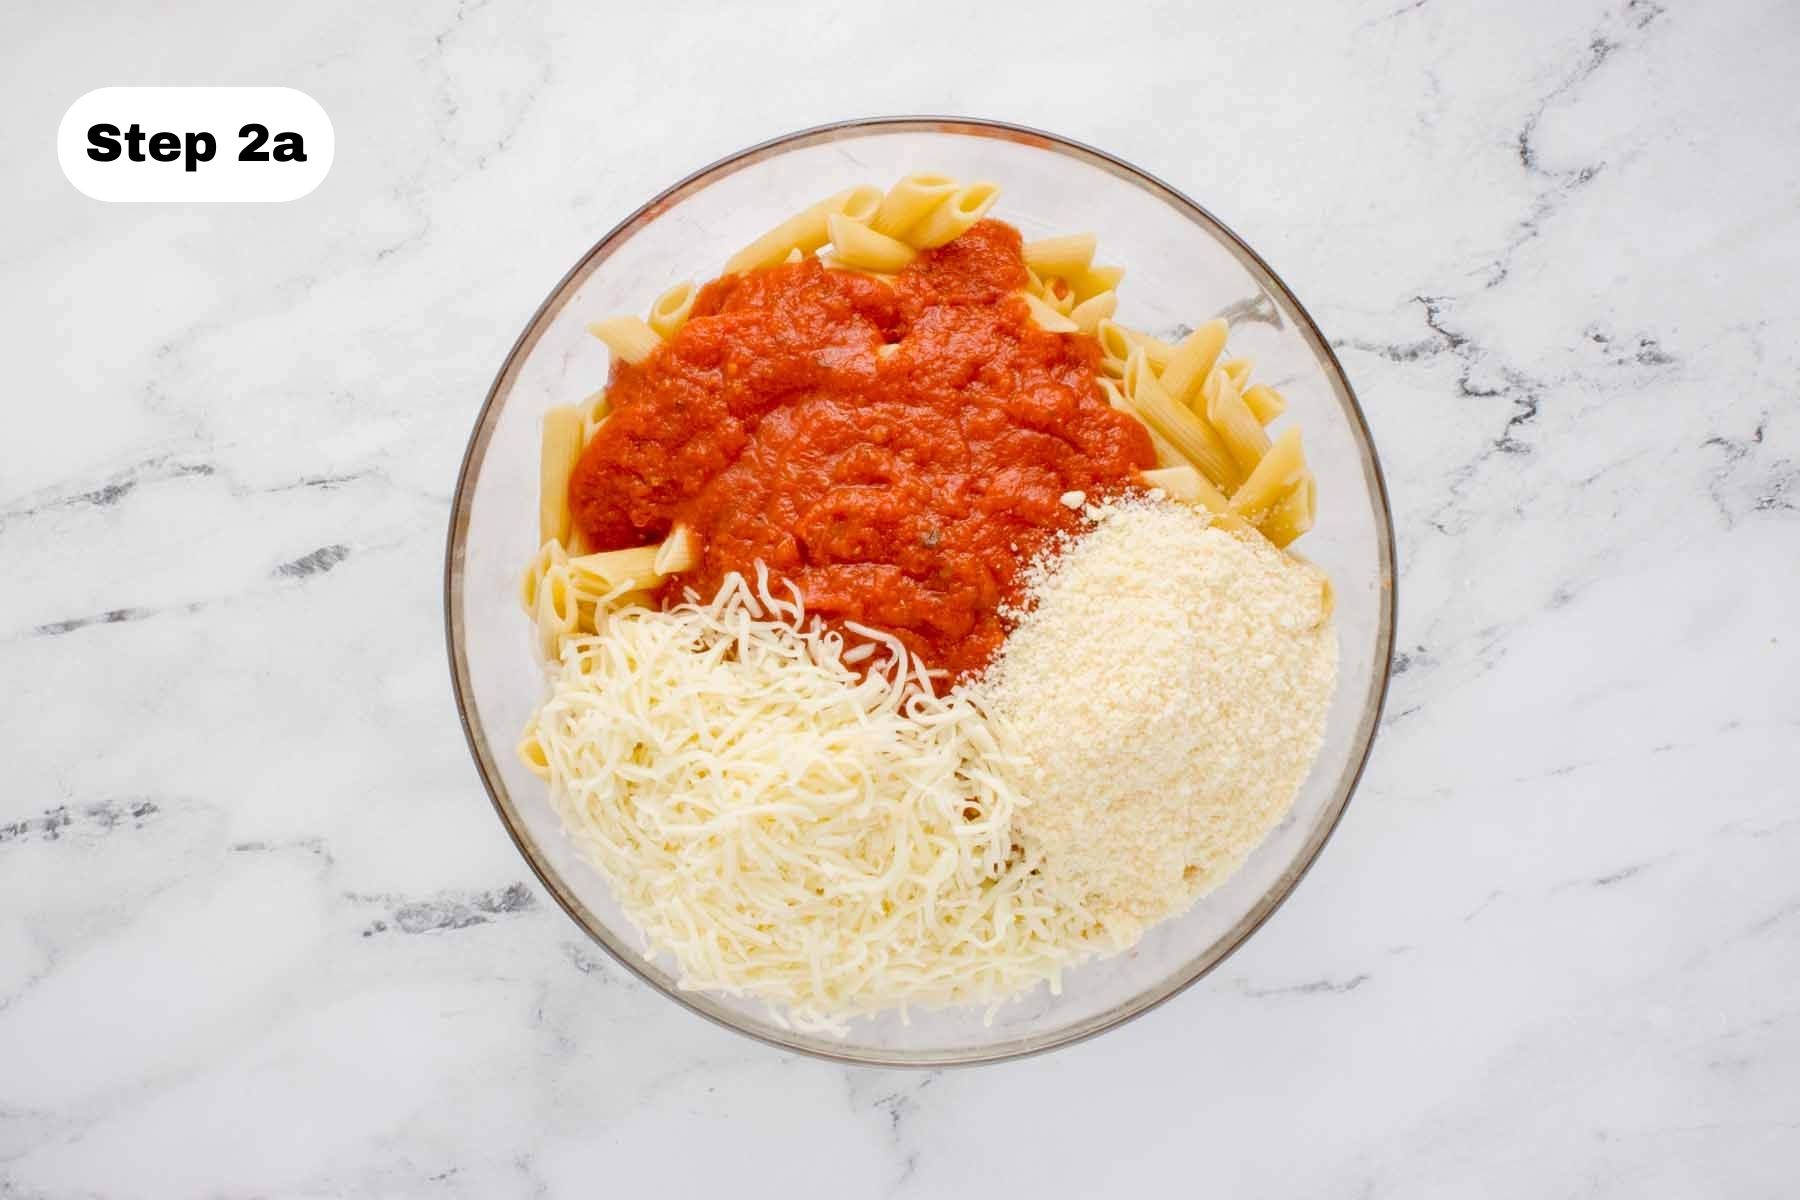 Cooked penne pasta, marinara sauce, mozzarella, and Parmesan in a glass bowl.